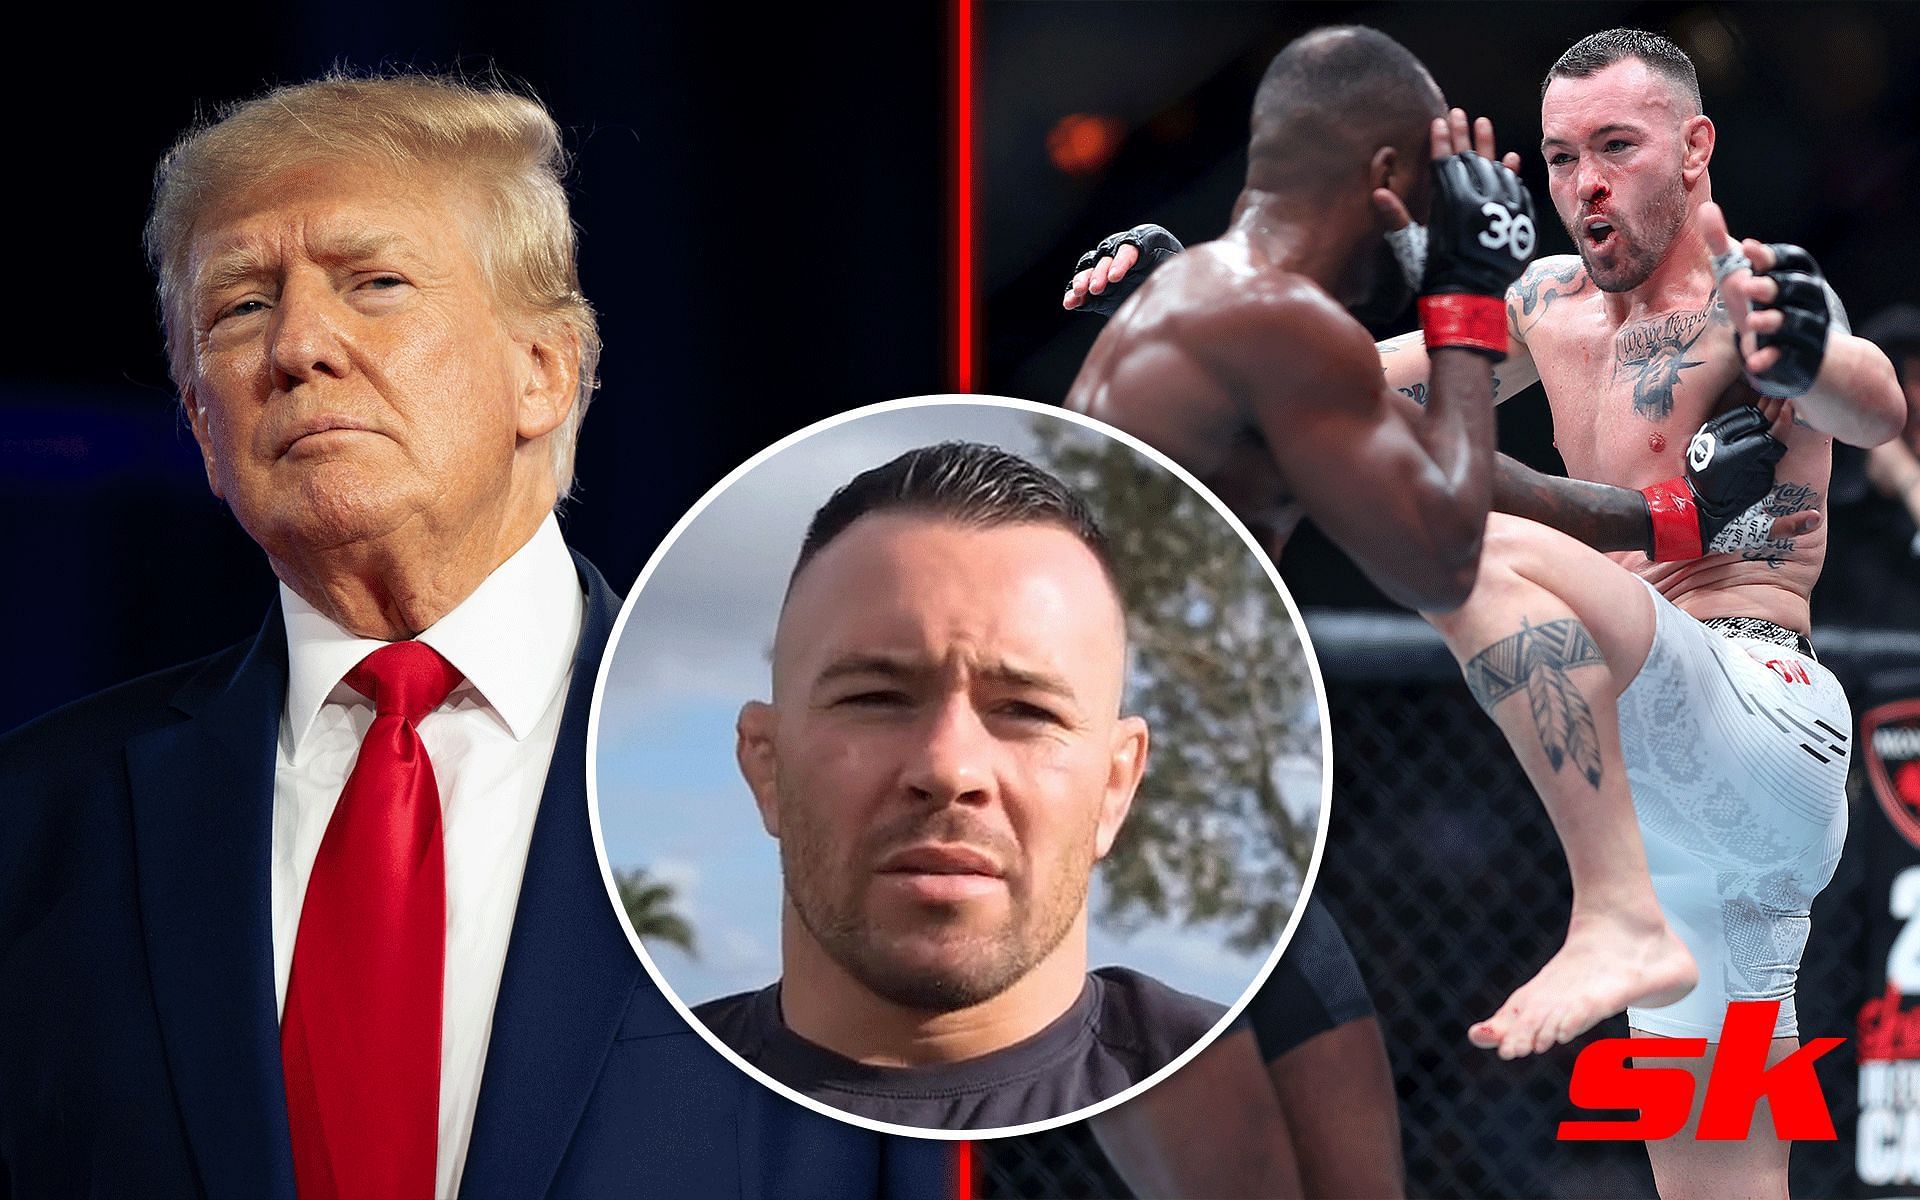 Colby Covington (Center) talks Donald Trump (Left) conspiracy [Images via: @colbycovington on Instagram and Getty]